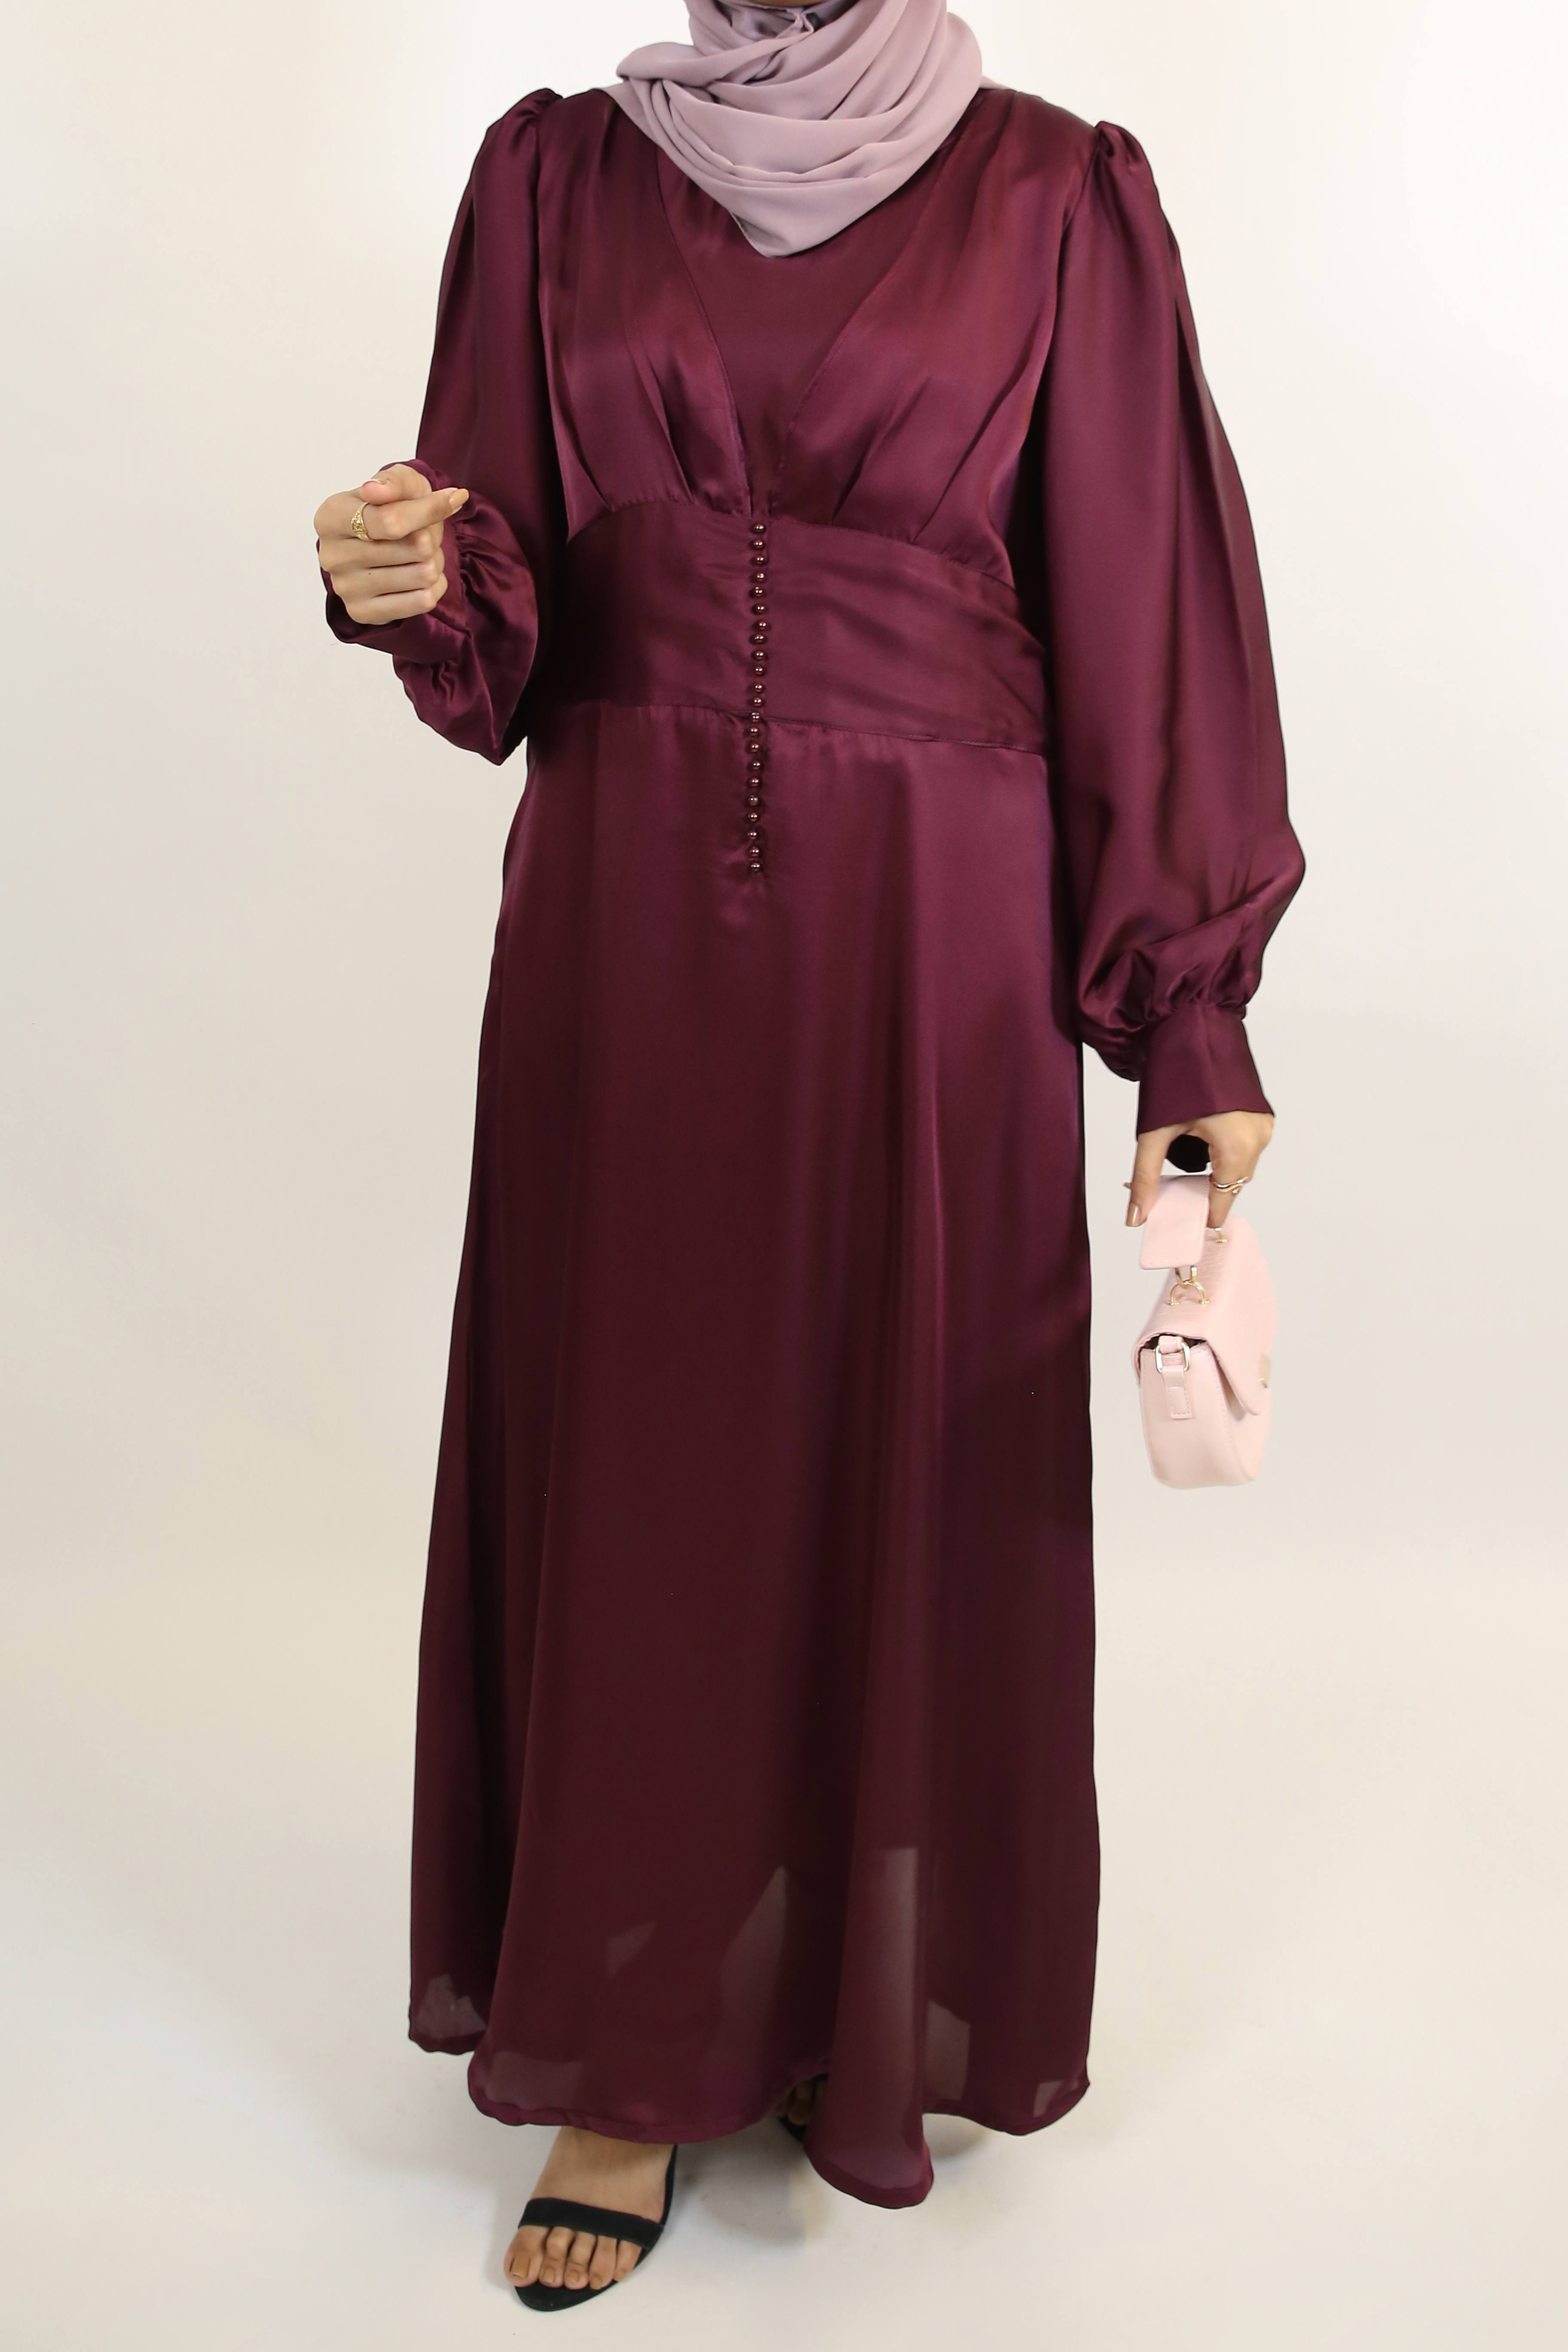 Qirmizi- Classy Satin Maxi Dress with button array front detailing- Mulberry Red